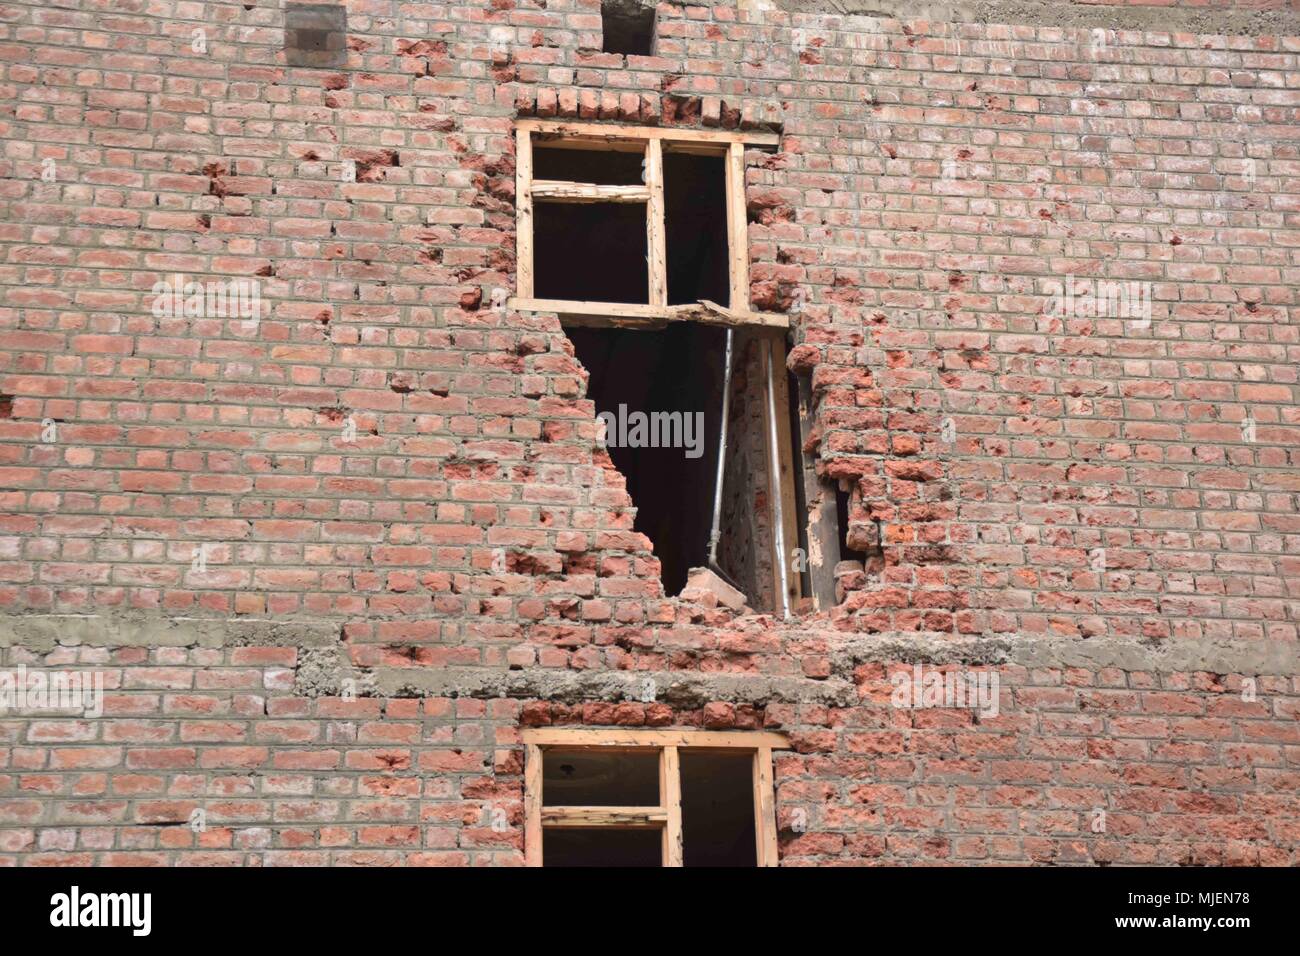 May 5, 2018 - Srinagar, Jammu & Kashmir, India - Damaged parts of Residencial building which were gutted during Encounter in Srinagar.4 Killed and several injured in an encounter between Indian forces and militants at chatabal area of Srinagar summer capital of Indian Kashmir on Saturday. Three militants were killed during a brief shootout after government forces laid seige around densely populated chatabal area of Srinagar. A young man also died after he was hit by the armoured vehicle during the clashes between the residents and police force as residents tried to help the Militants in escap Stock Photo